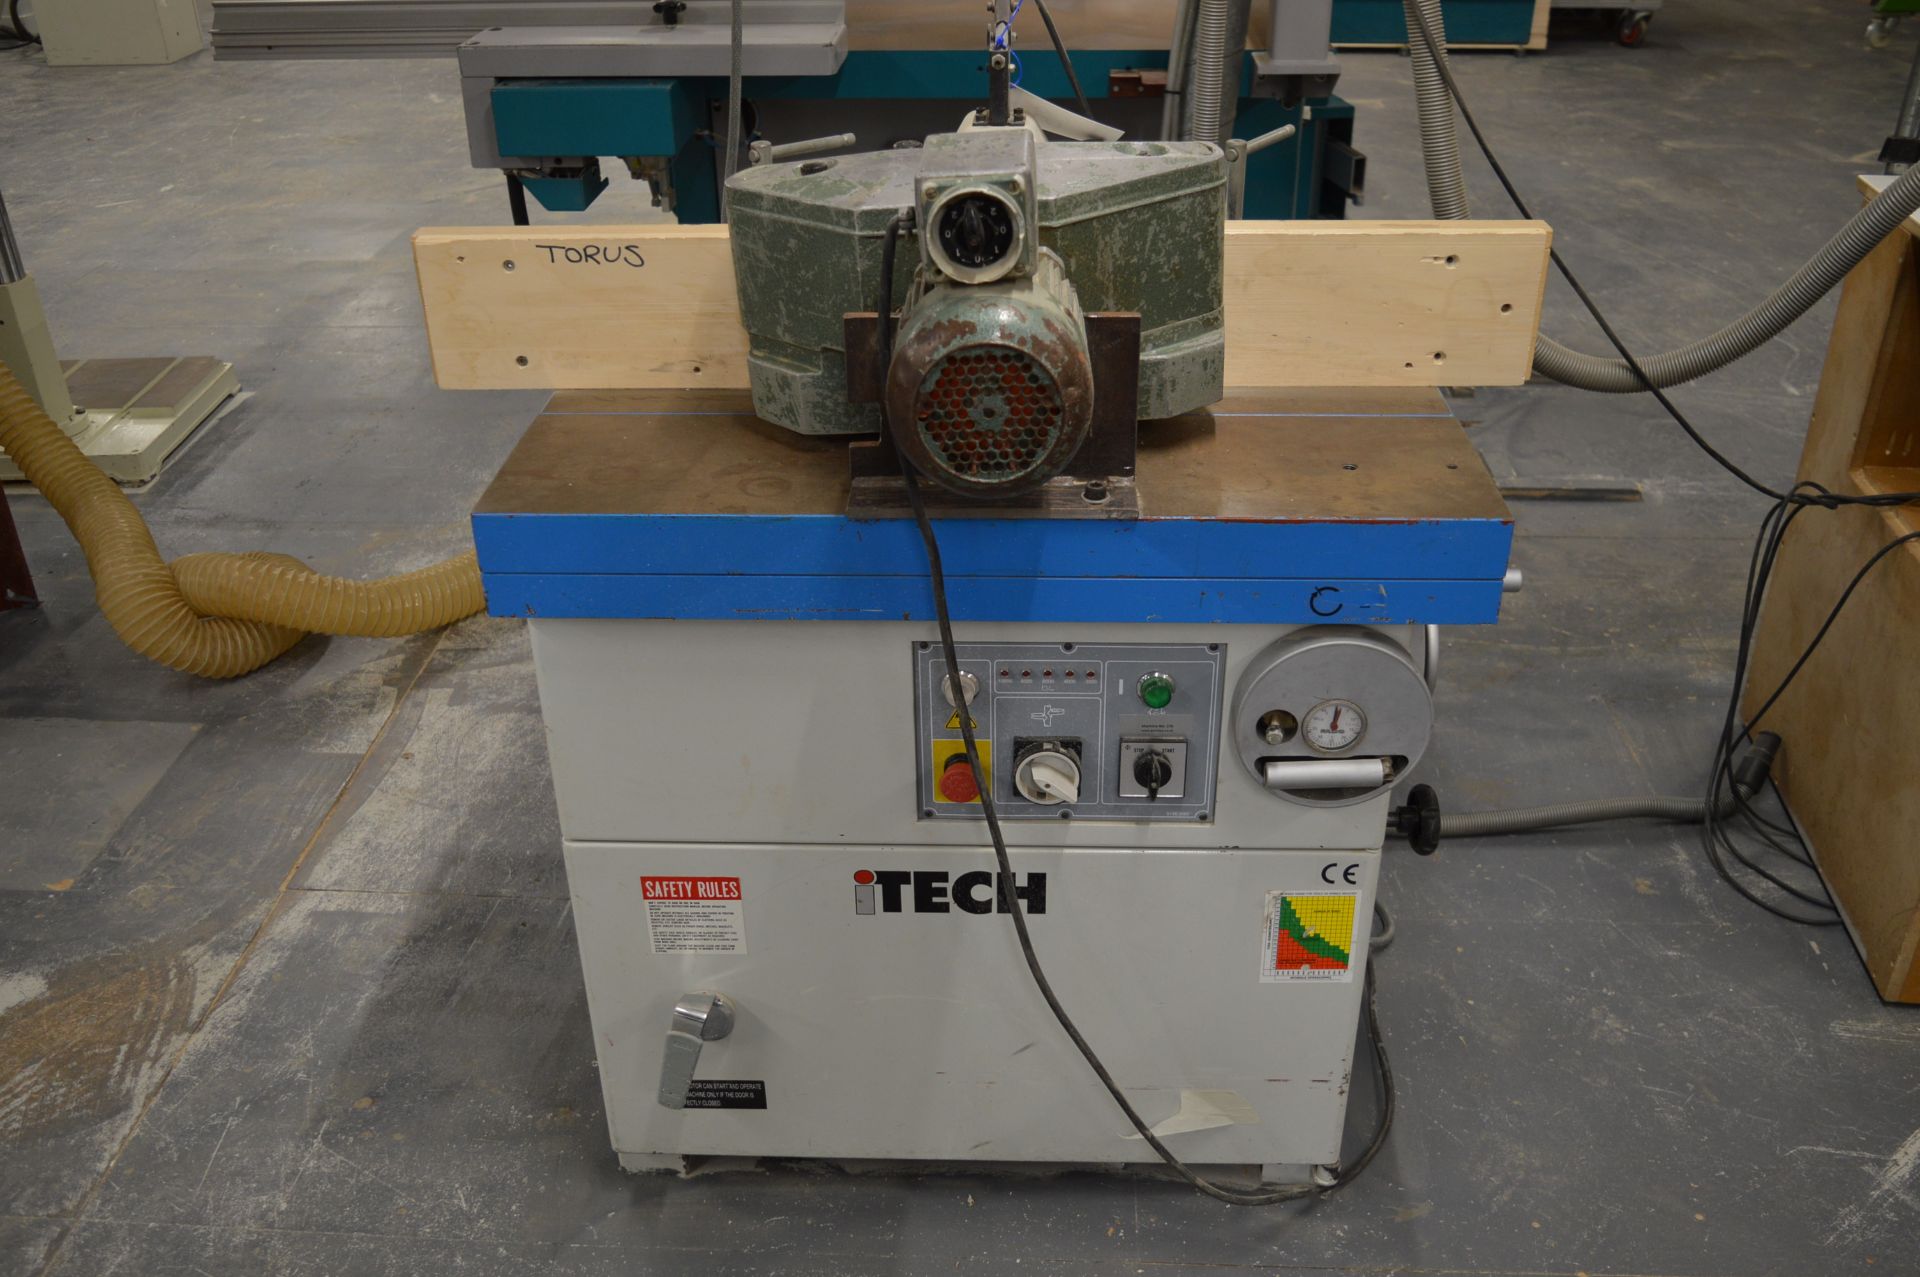 iTech SM55ISI spindle moulder, Serial No. 0706026 (2007) (Ref: 276) (Location: Two Gates on